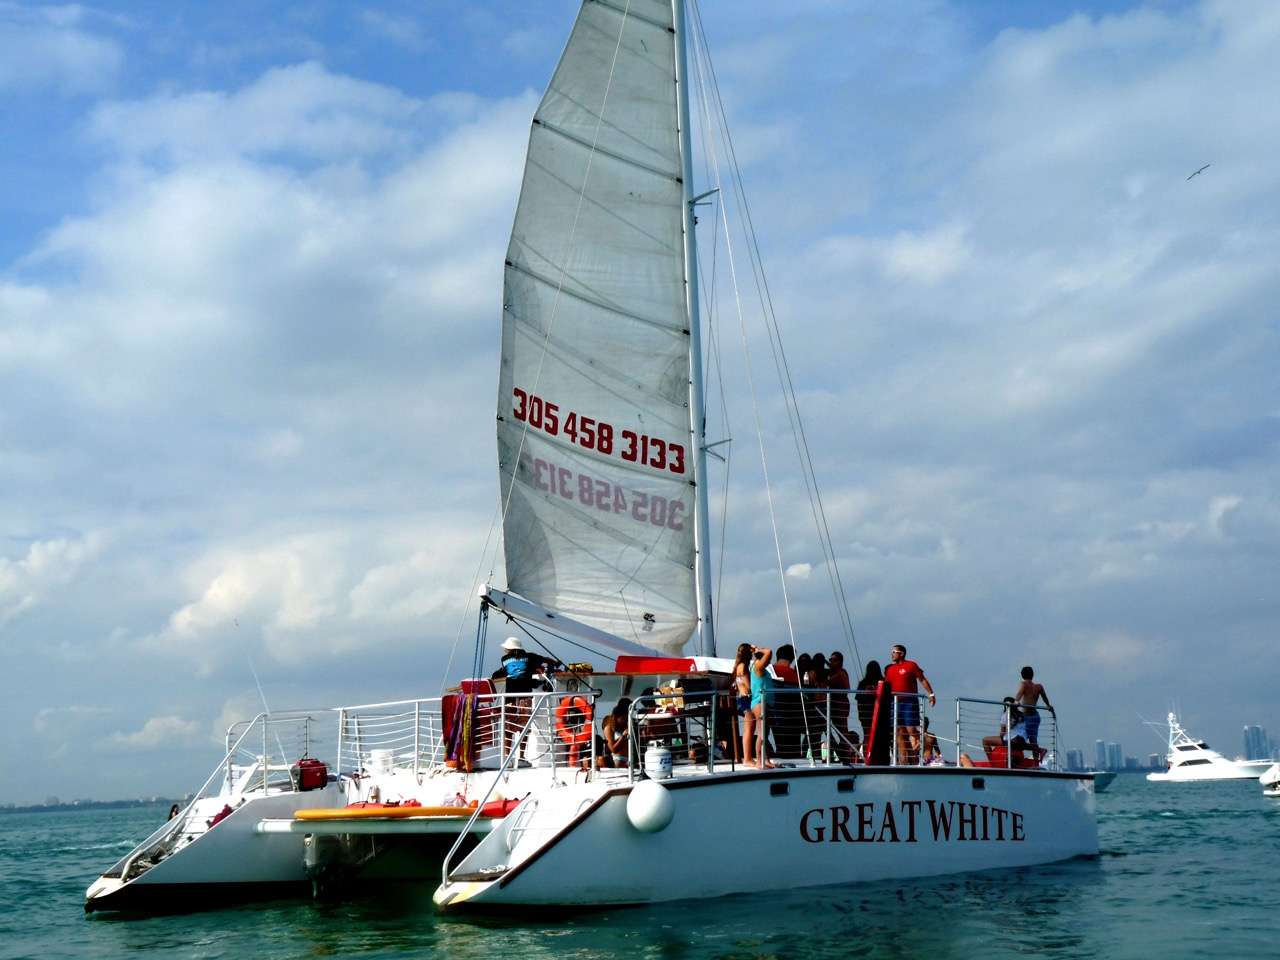 Yacht Party Rental Miami - A Great Way To Enjoy Summer Fun